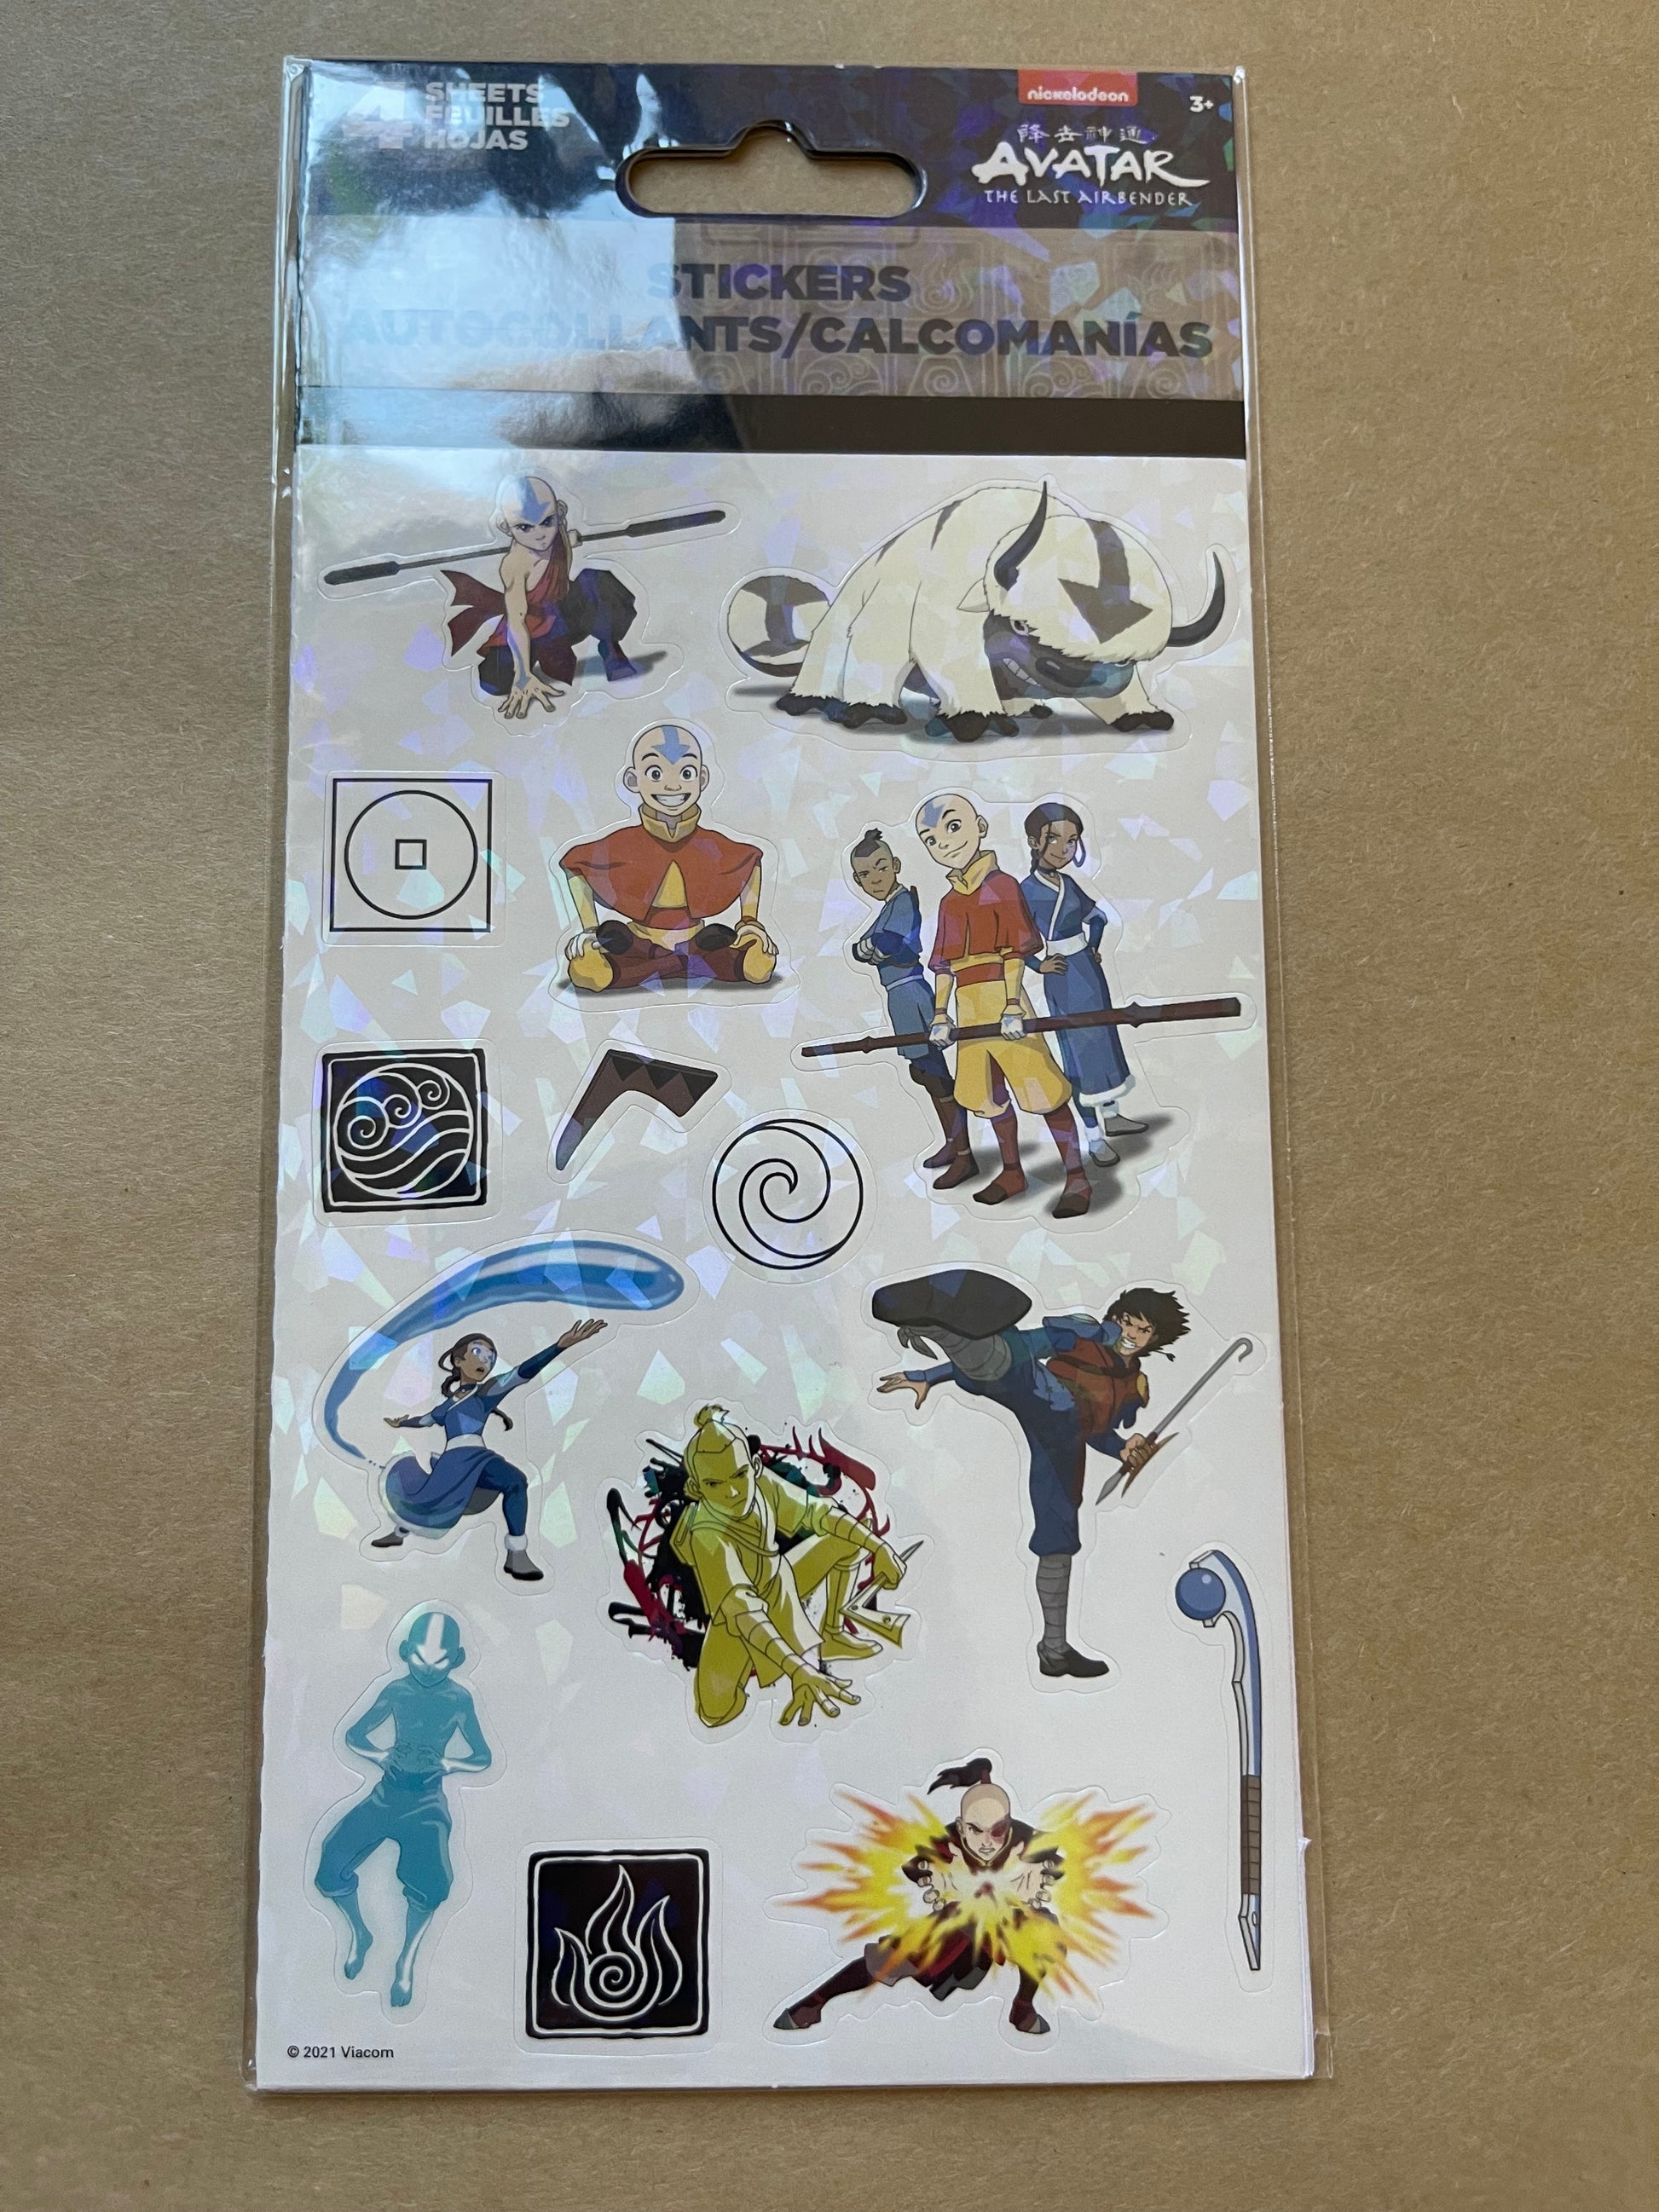 Avatar The Last Airbender: Characters 4 Sticker Sheets featuring aang, zuko